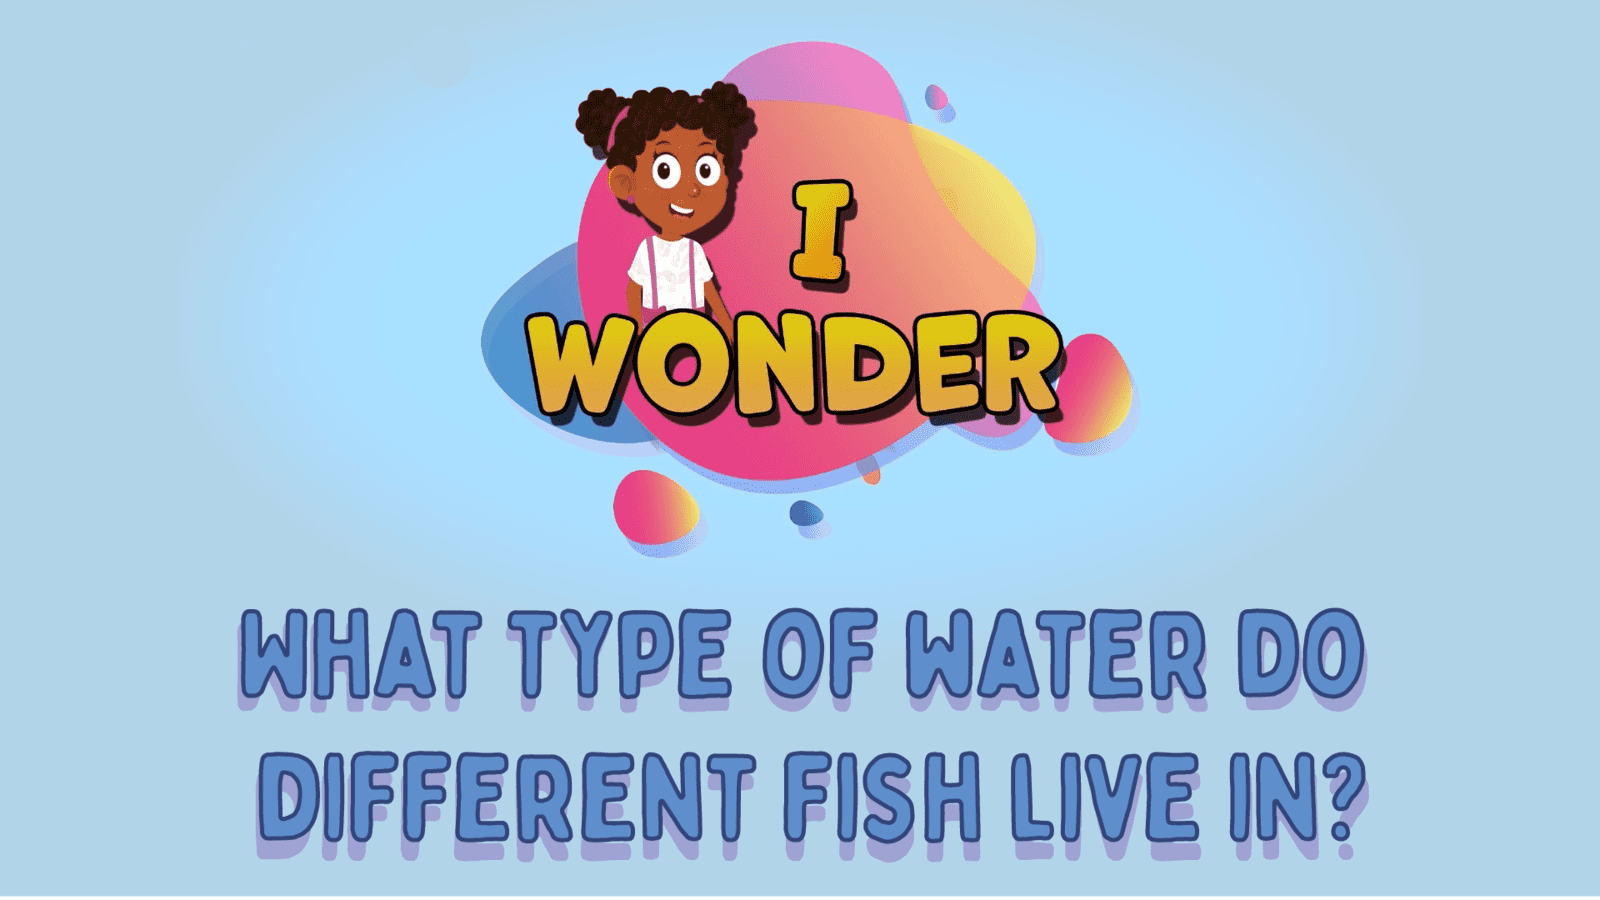 What Type Of Water Do Different Fish Live In?